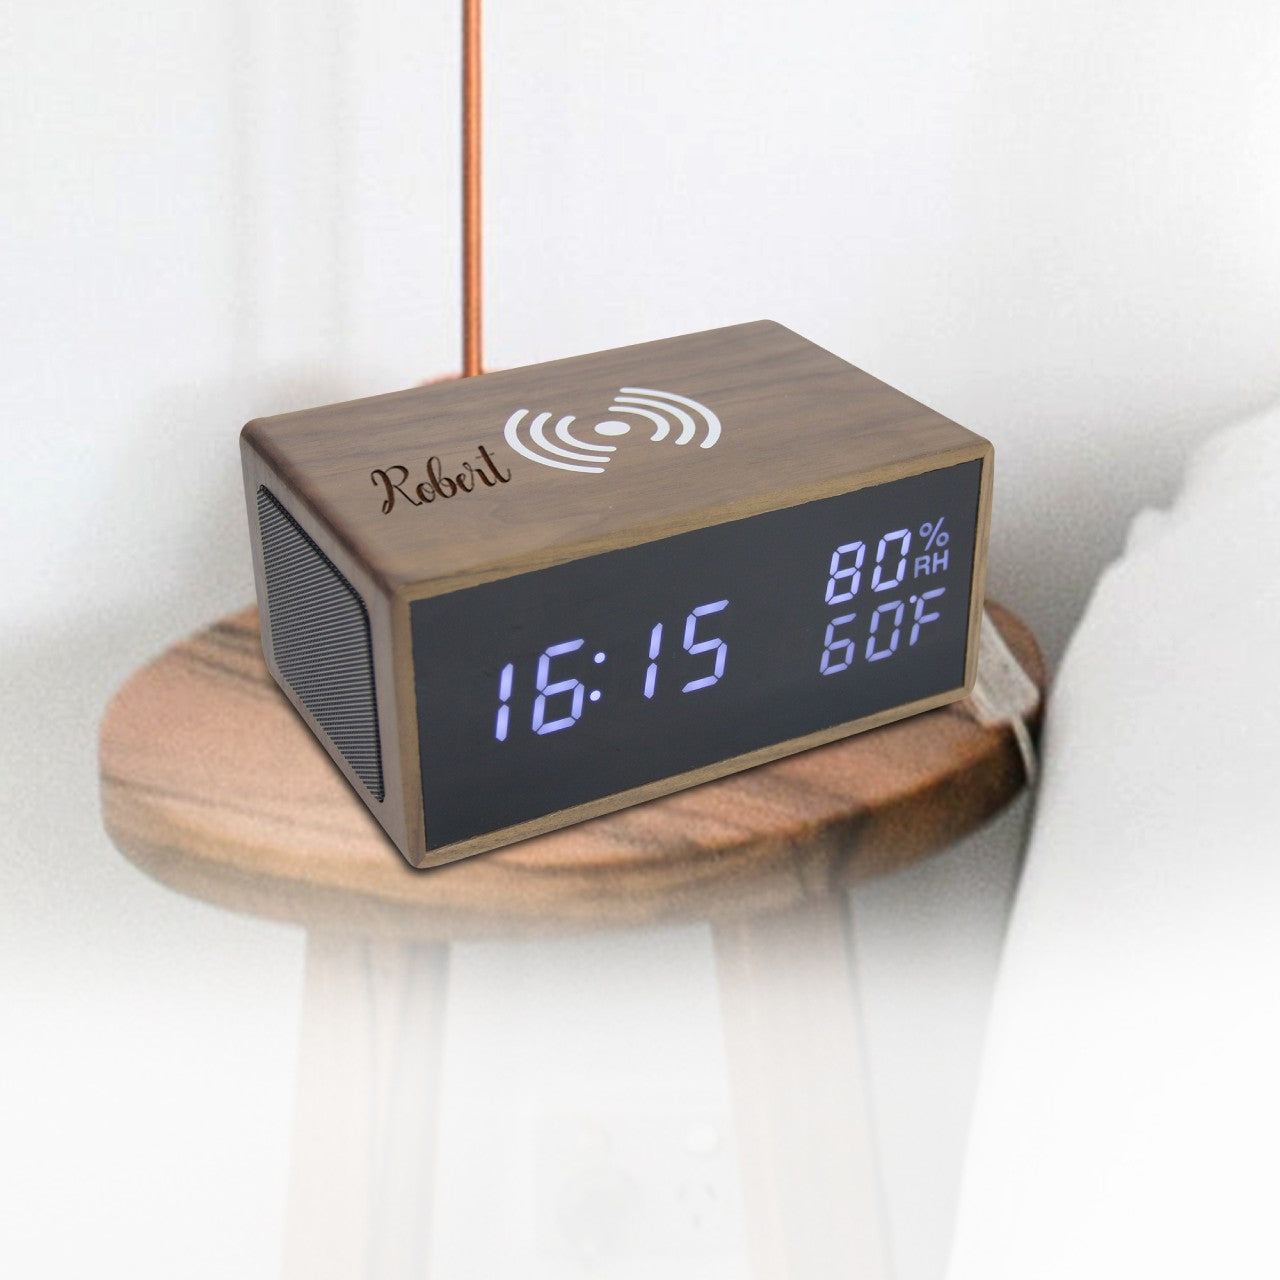 Custom Wooden Alarm Clock With Bluetooth Speaker, Wireless Charging For iphone